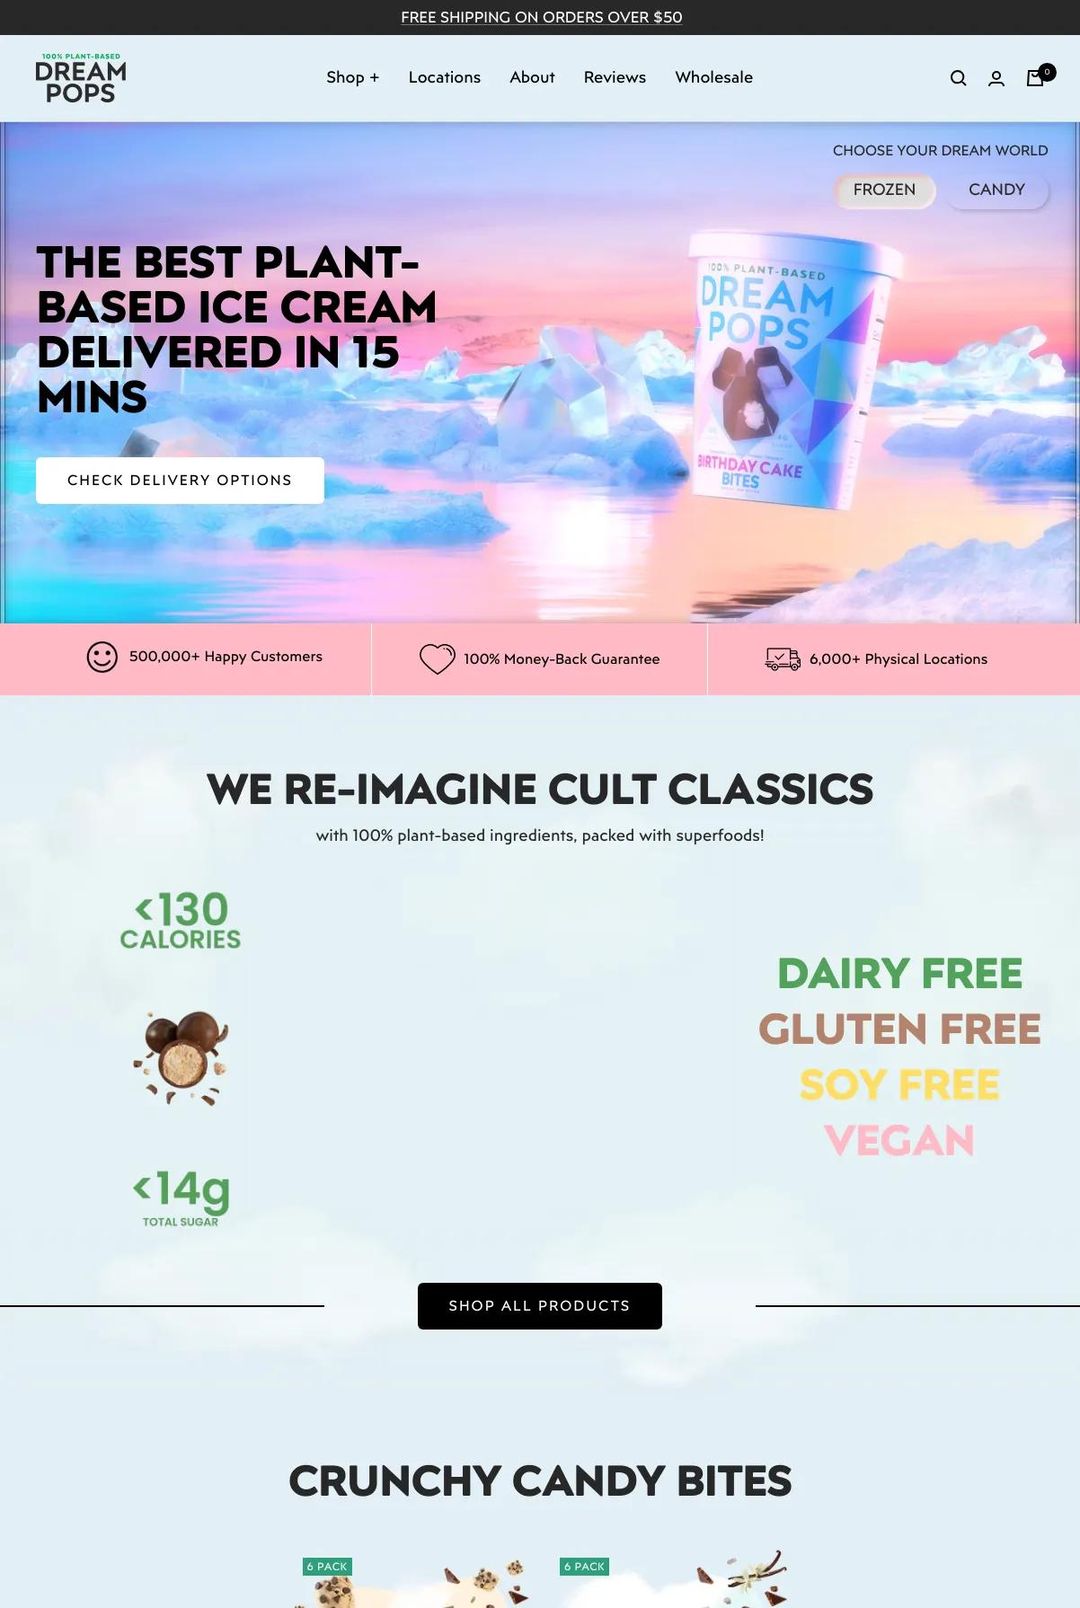 Screenshot 1 of Dream Pops (Example Shopify Food and Beverage Website)